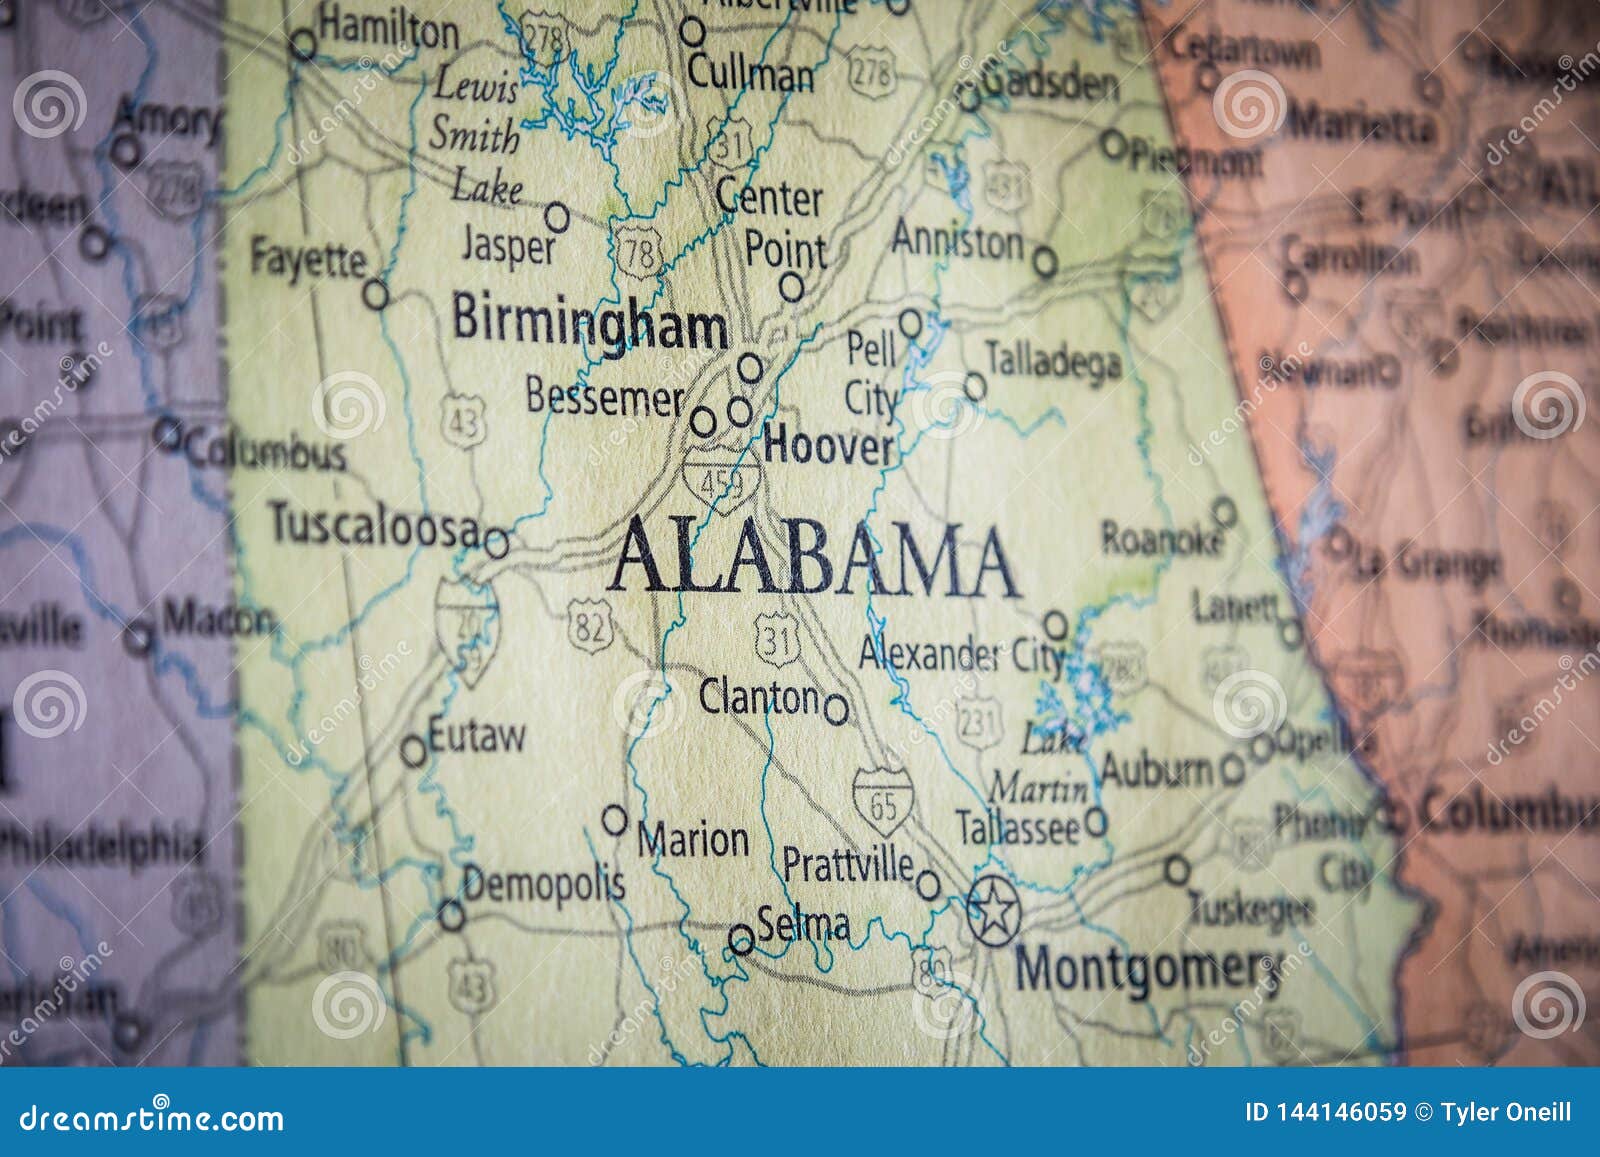 selective focus of alabama state on a geographical and political state map of the usa